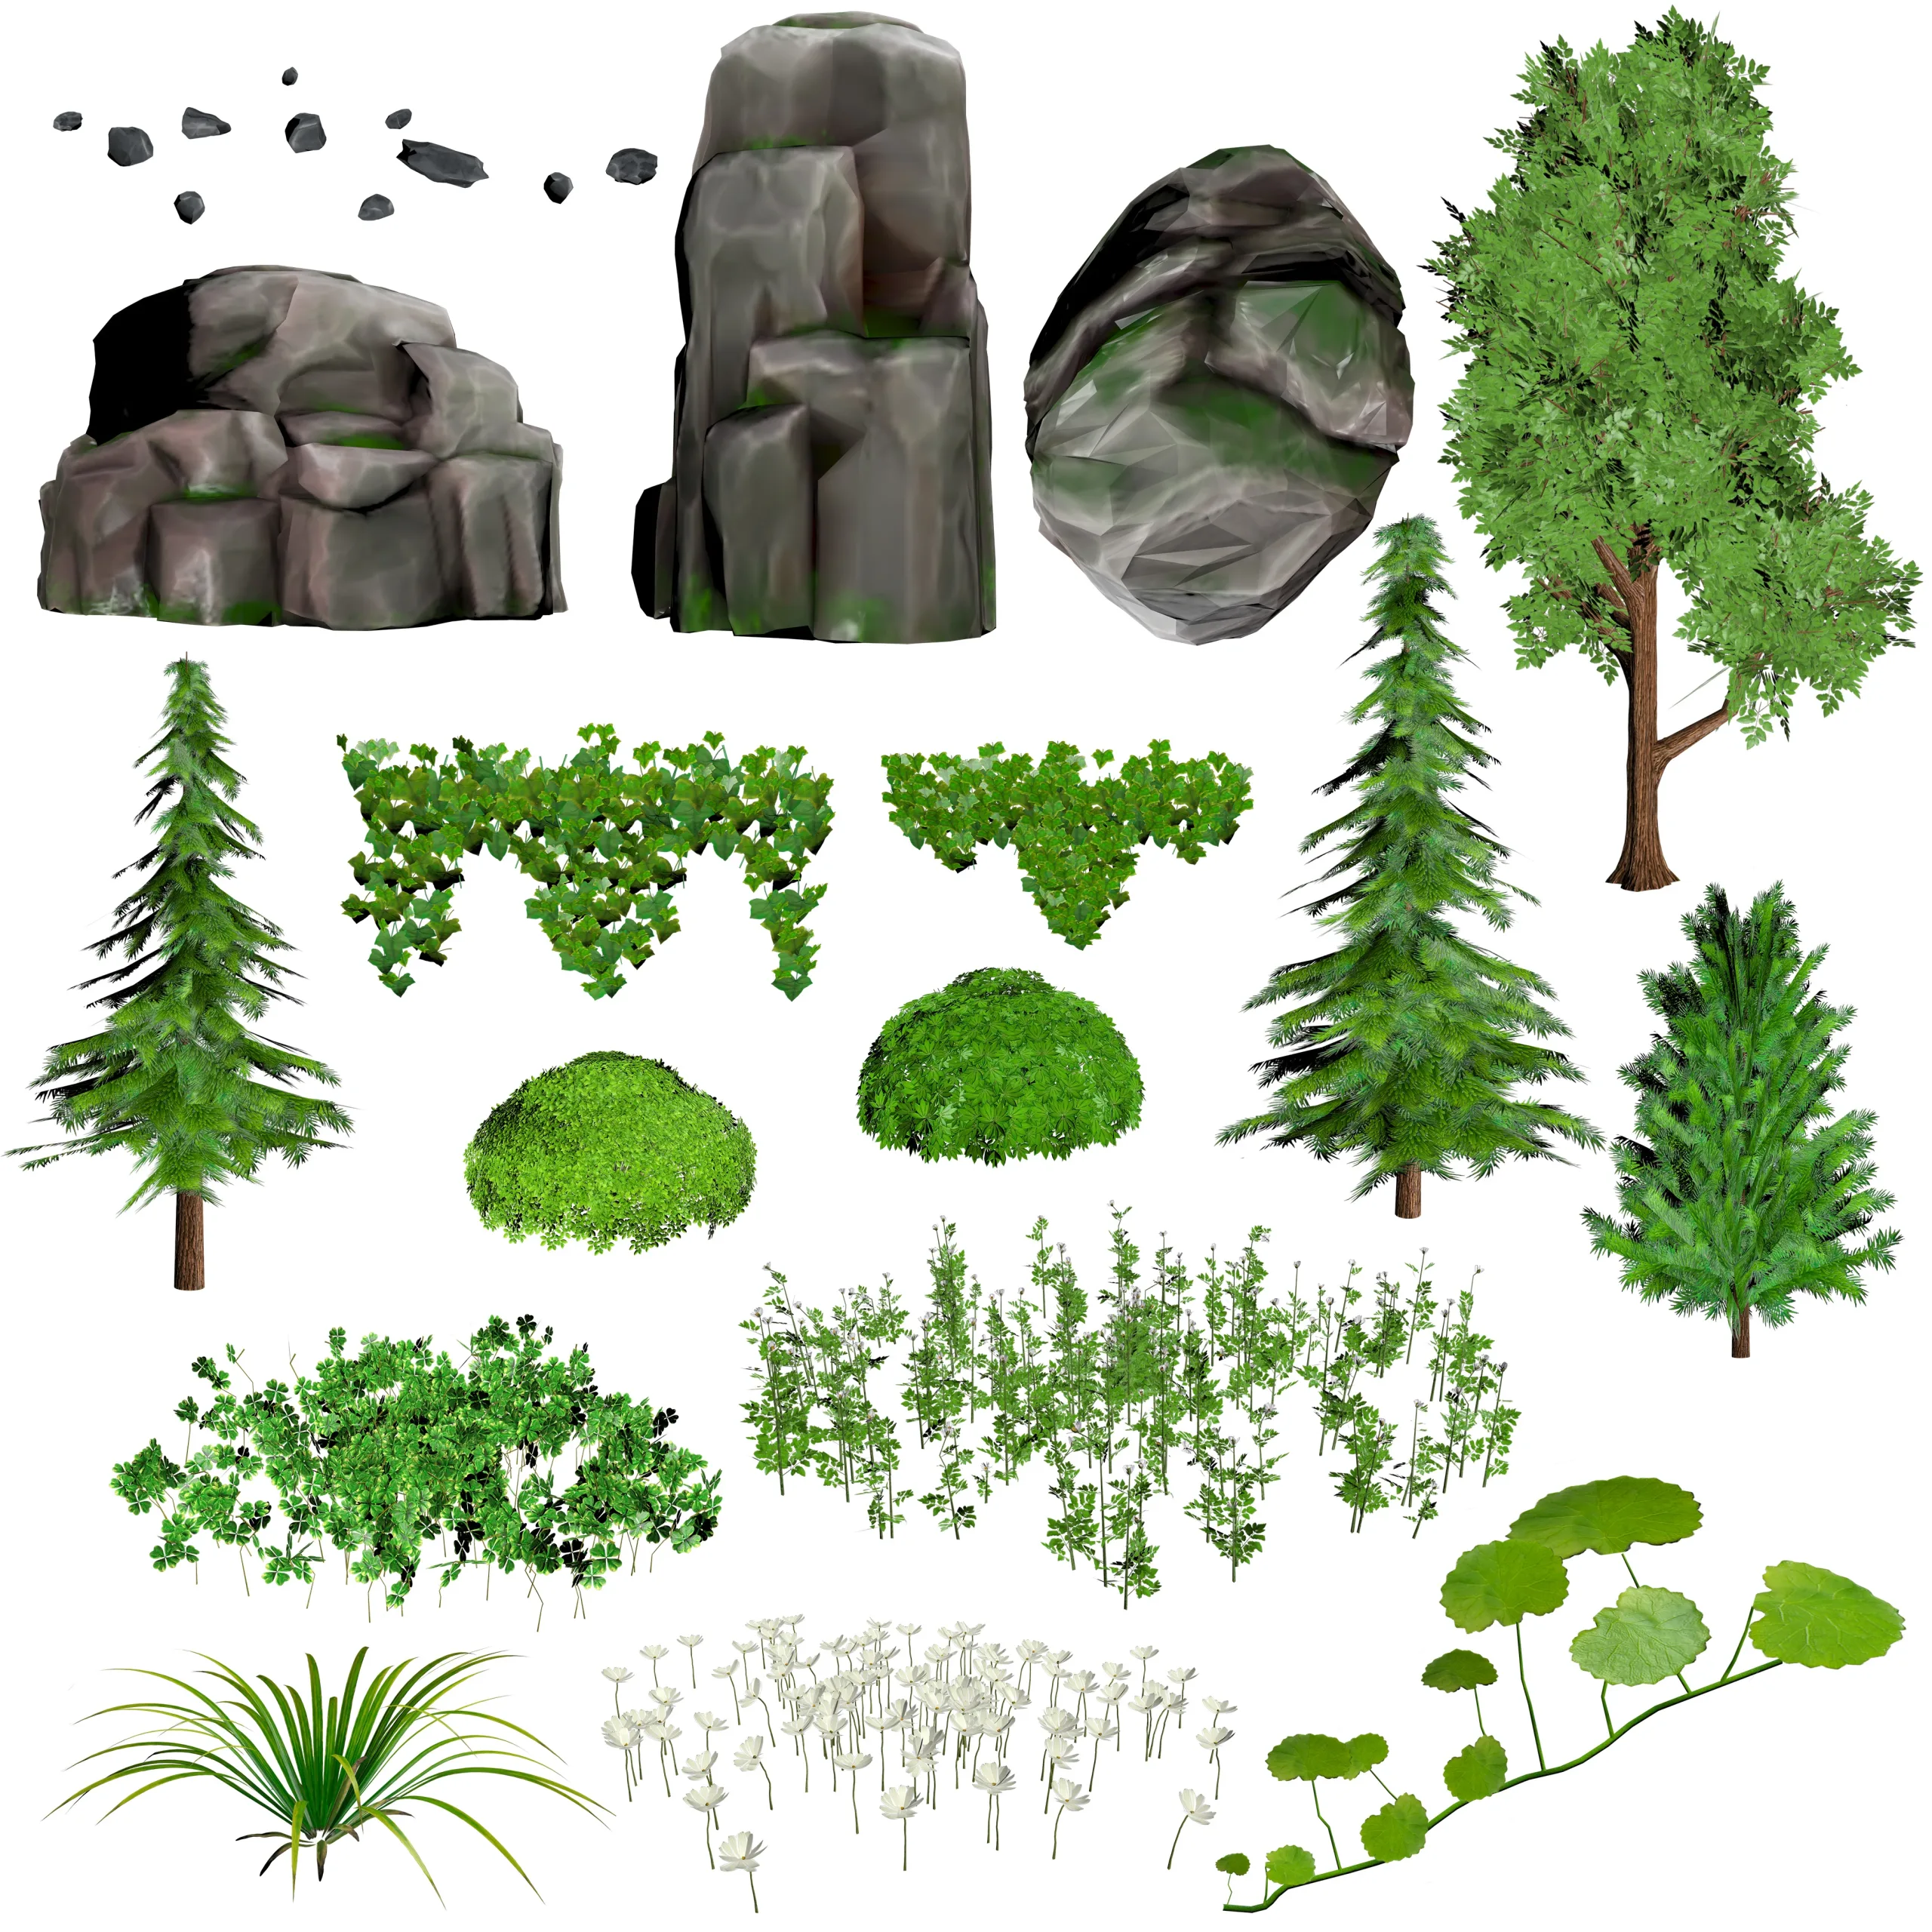 17 Stylized Game Ready Forest Assets